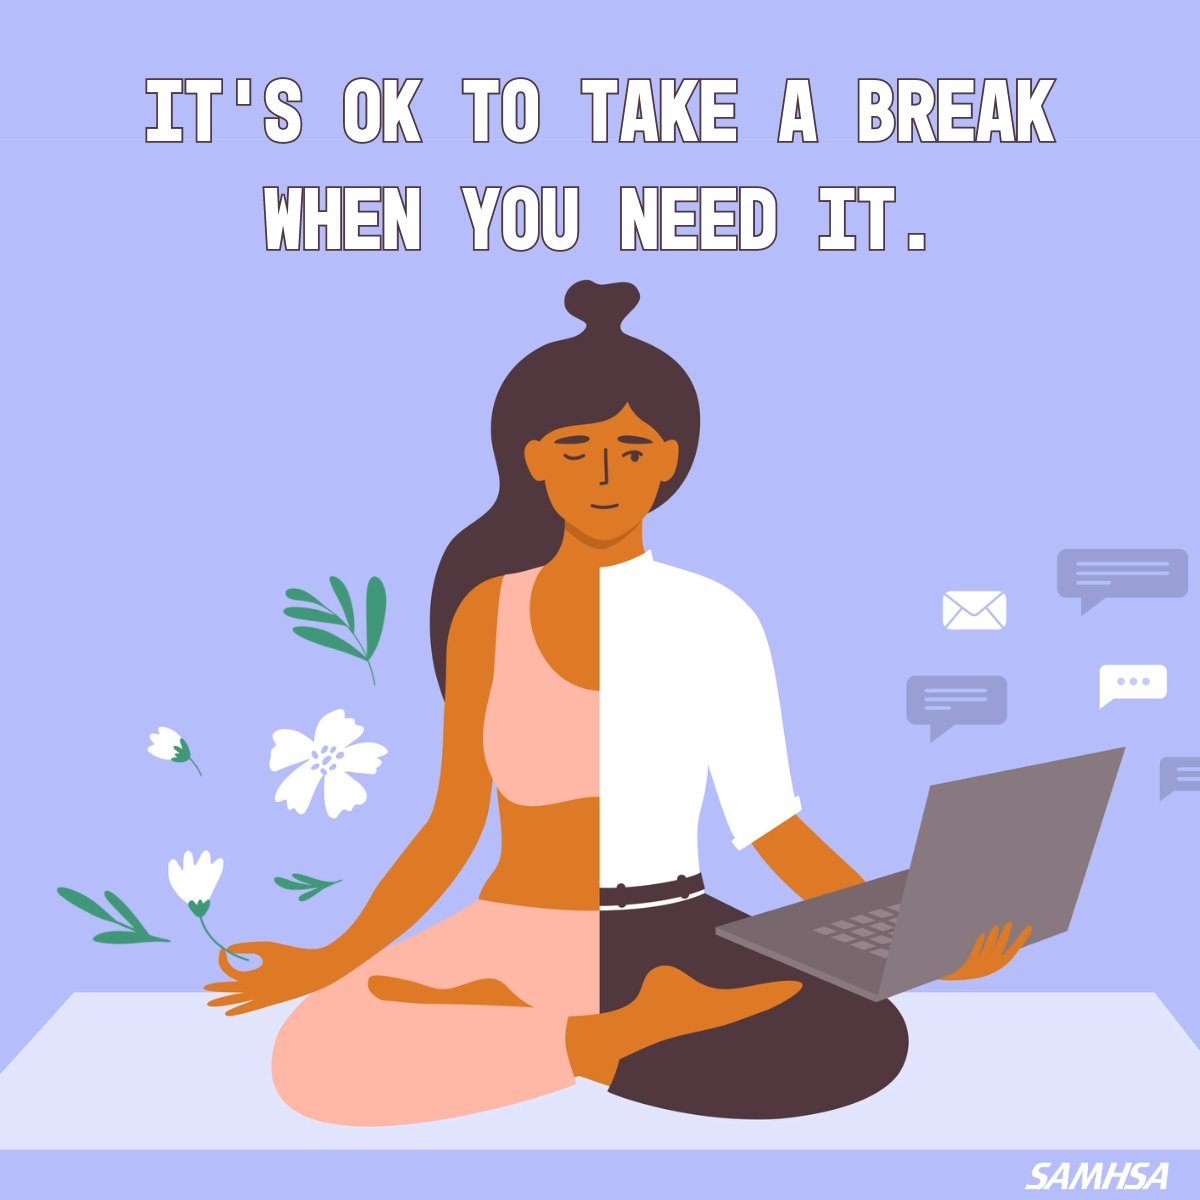 It’s ok to take a break when you need it. Sometimes life can be hectic—and this can impact our mood. Even so, it’s essential to take time to de-stress and prioritize wellness. If you ever feel overwhelmed, support is available at findsupport.gov #MHAM2024